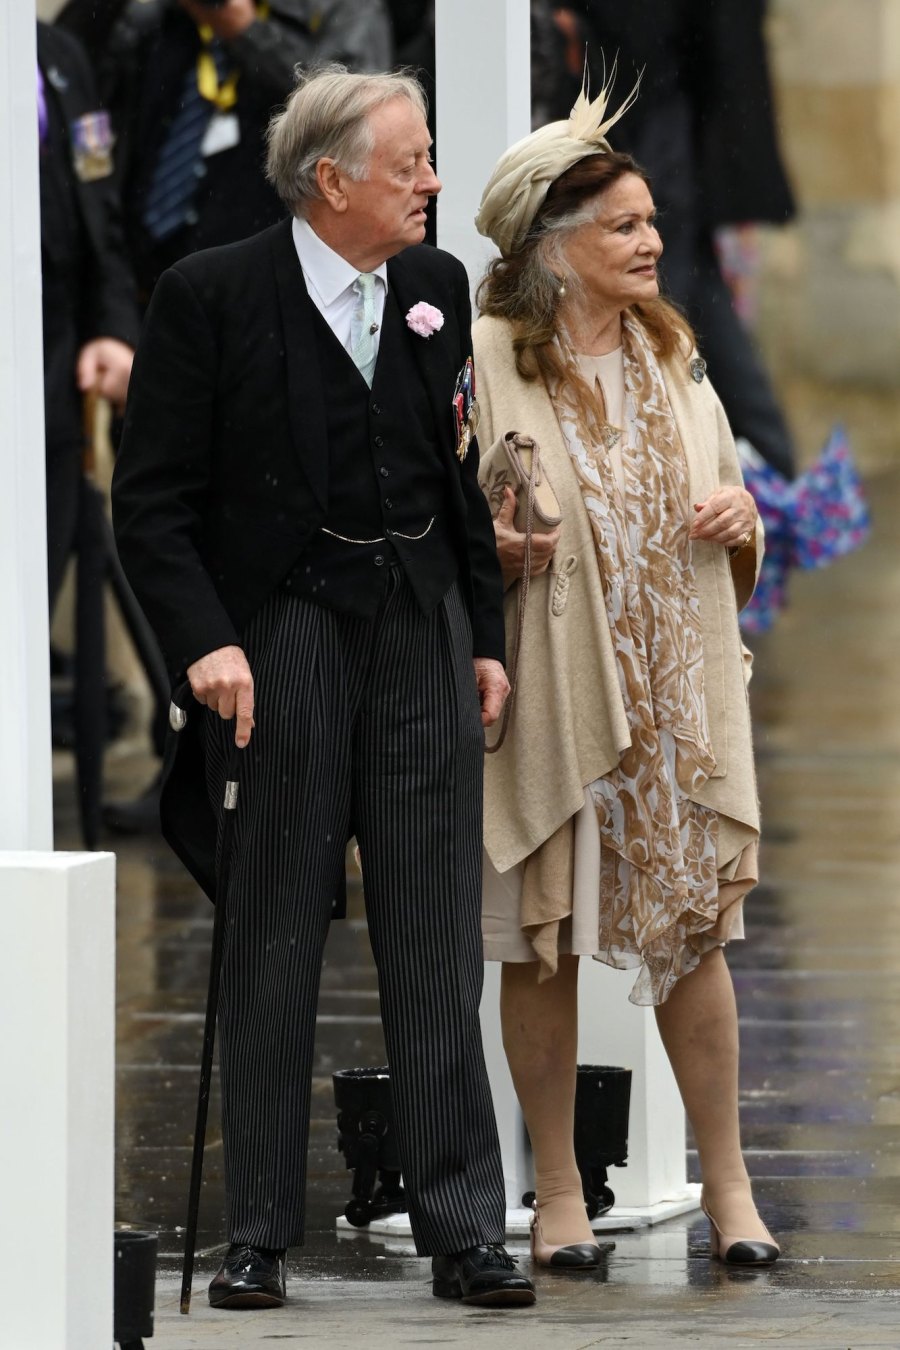 Andrew Parker Bowles Attends Coronation